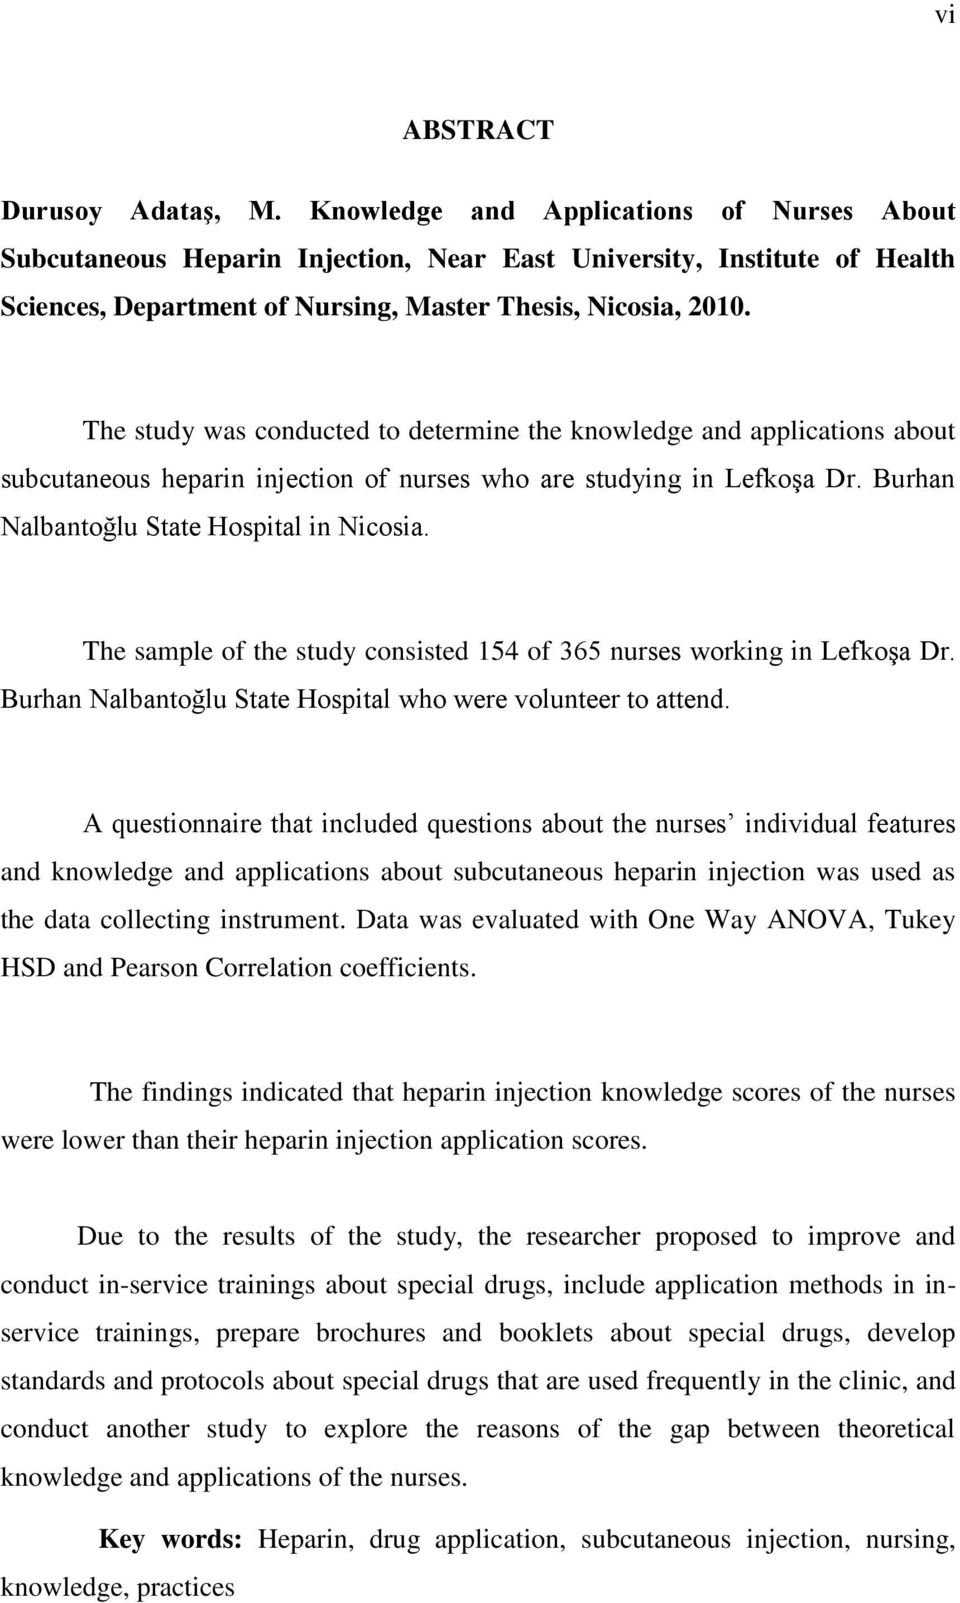 The study was conducted to determine the knowledge and applications about subcutaneous heparin injection of nurses who are studying in Lefkoşa Dr. Burhan Nalbantoğlu State Hospital in Nicosia.